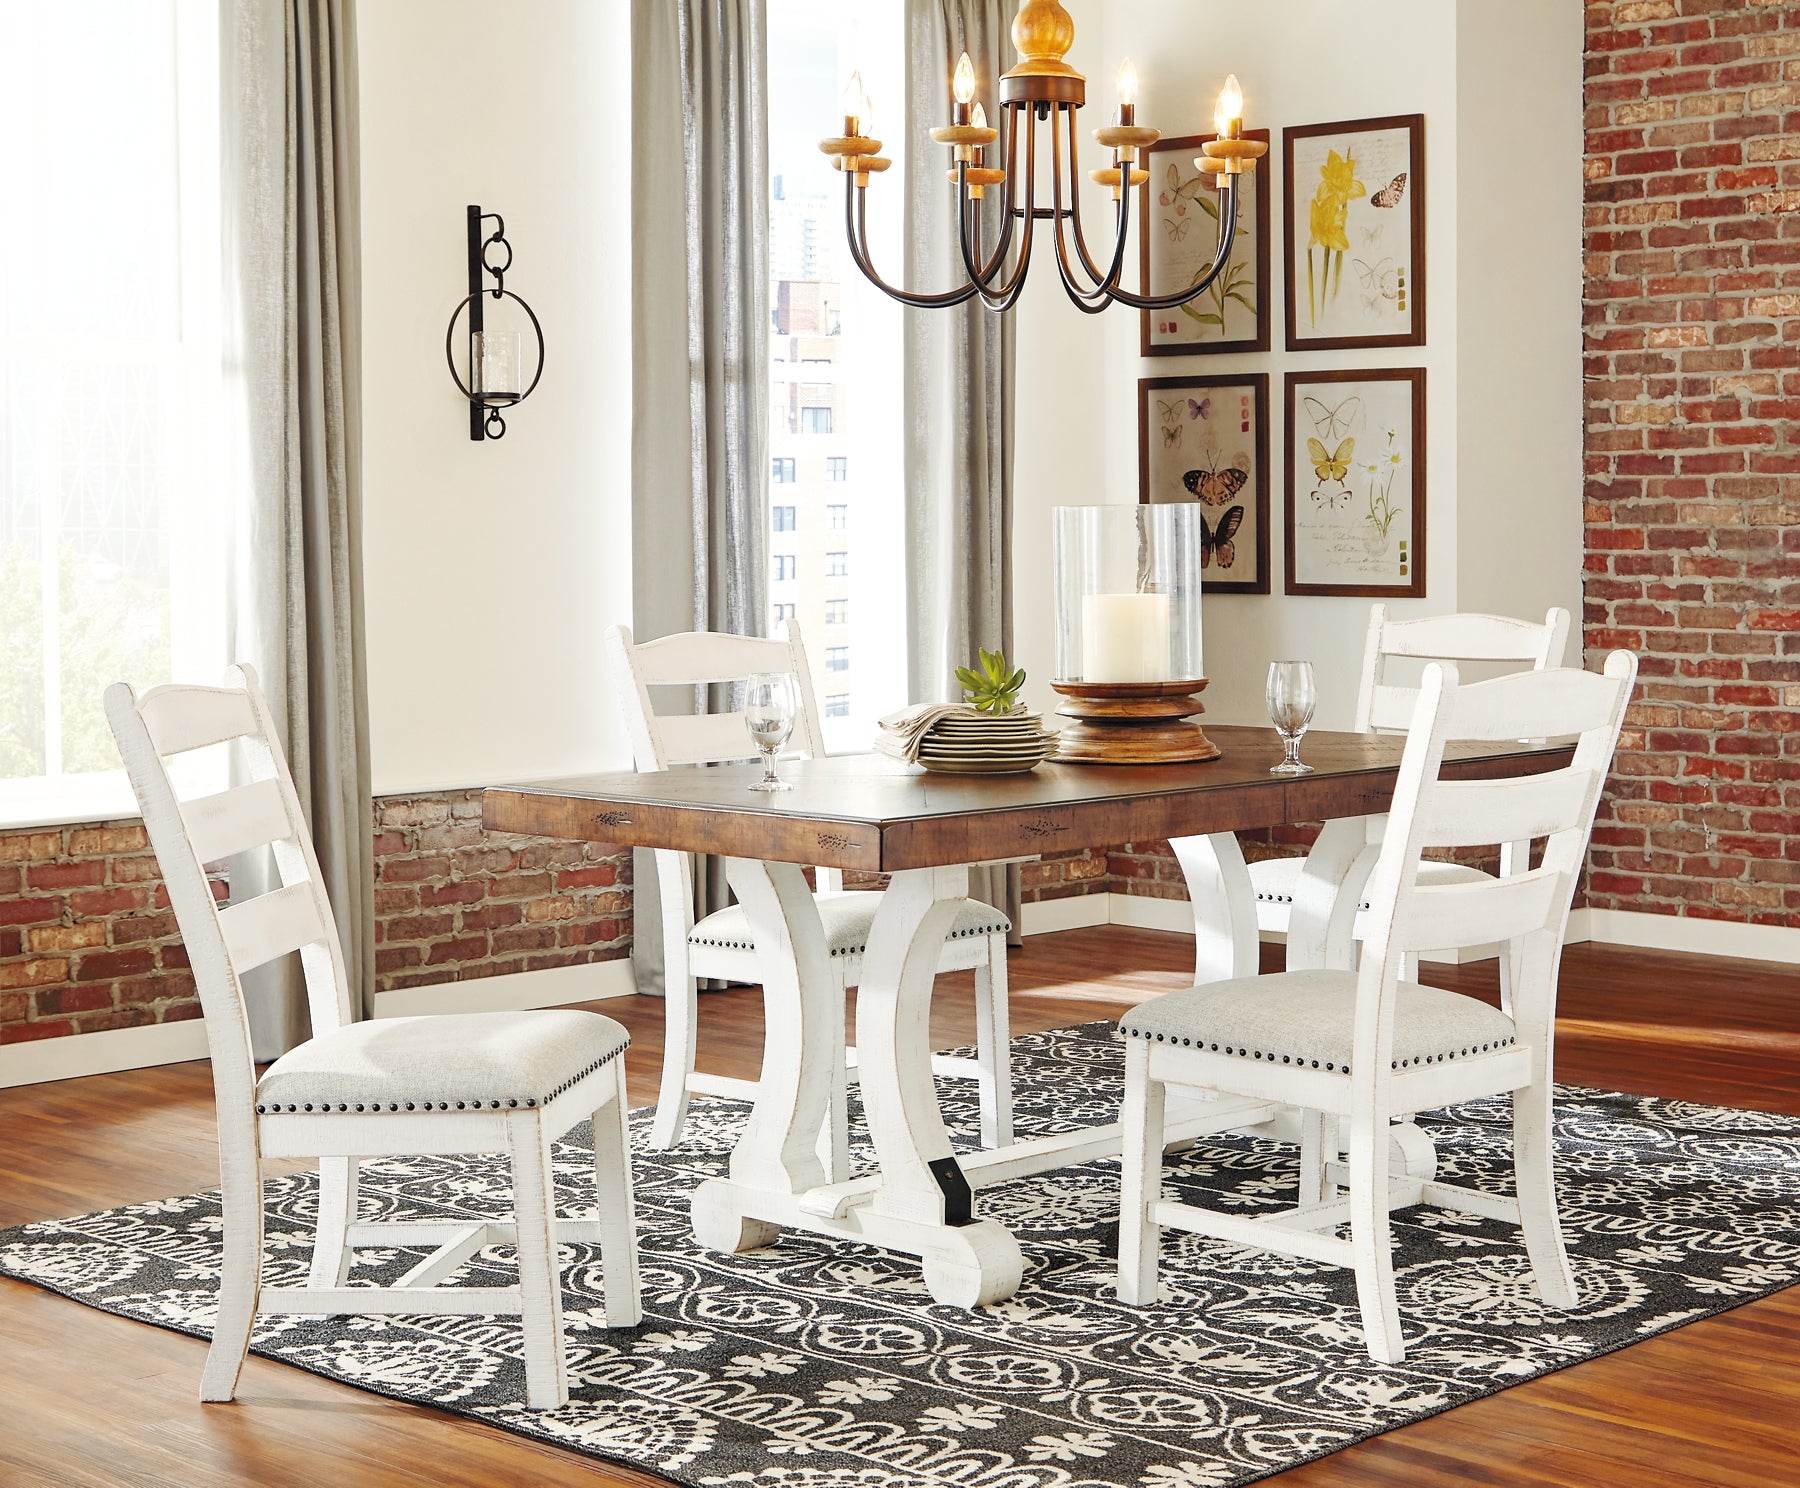 Valebeck Dining Table and 4 Chairs Wilson Furniture (OH)  in Bridgeport, Ohio. Serving Moundsville, Richmond, Smithfield, Cadiz, & St. Clairesville